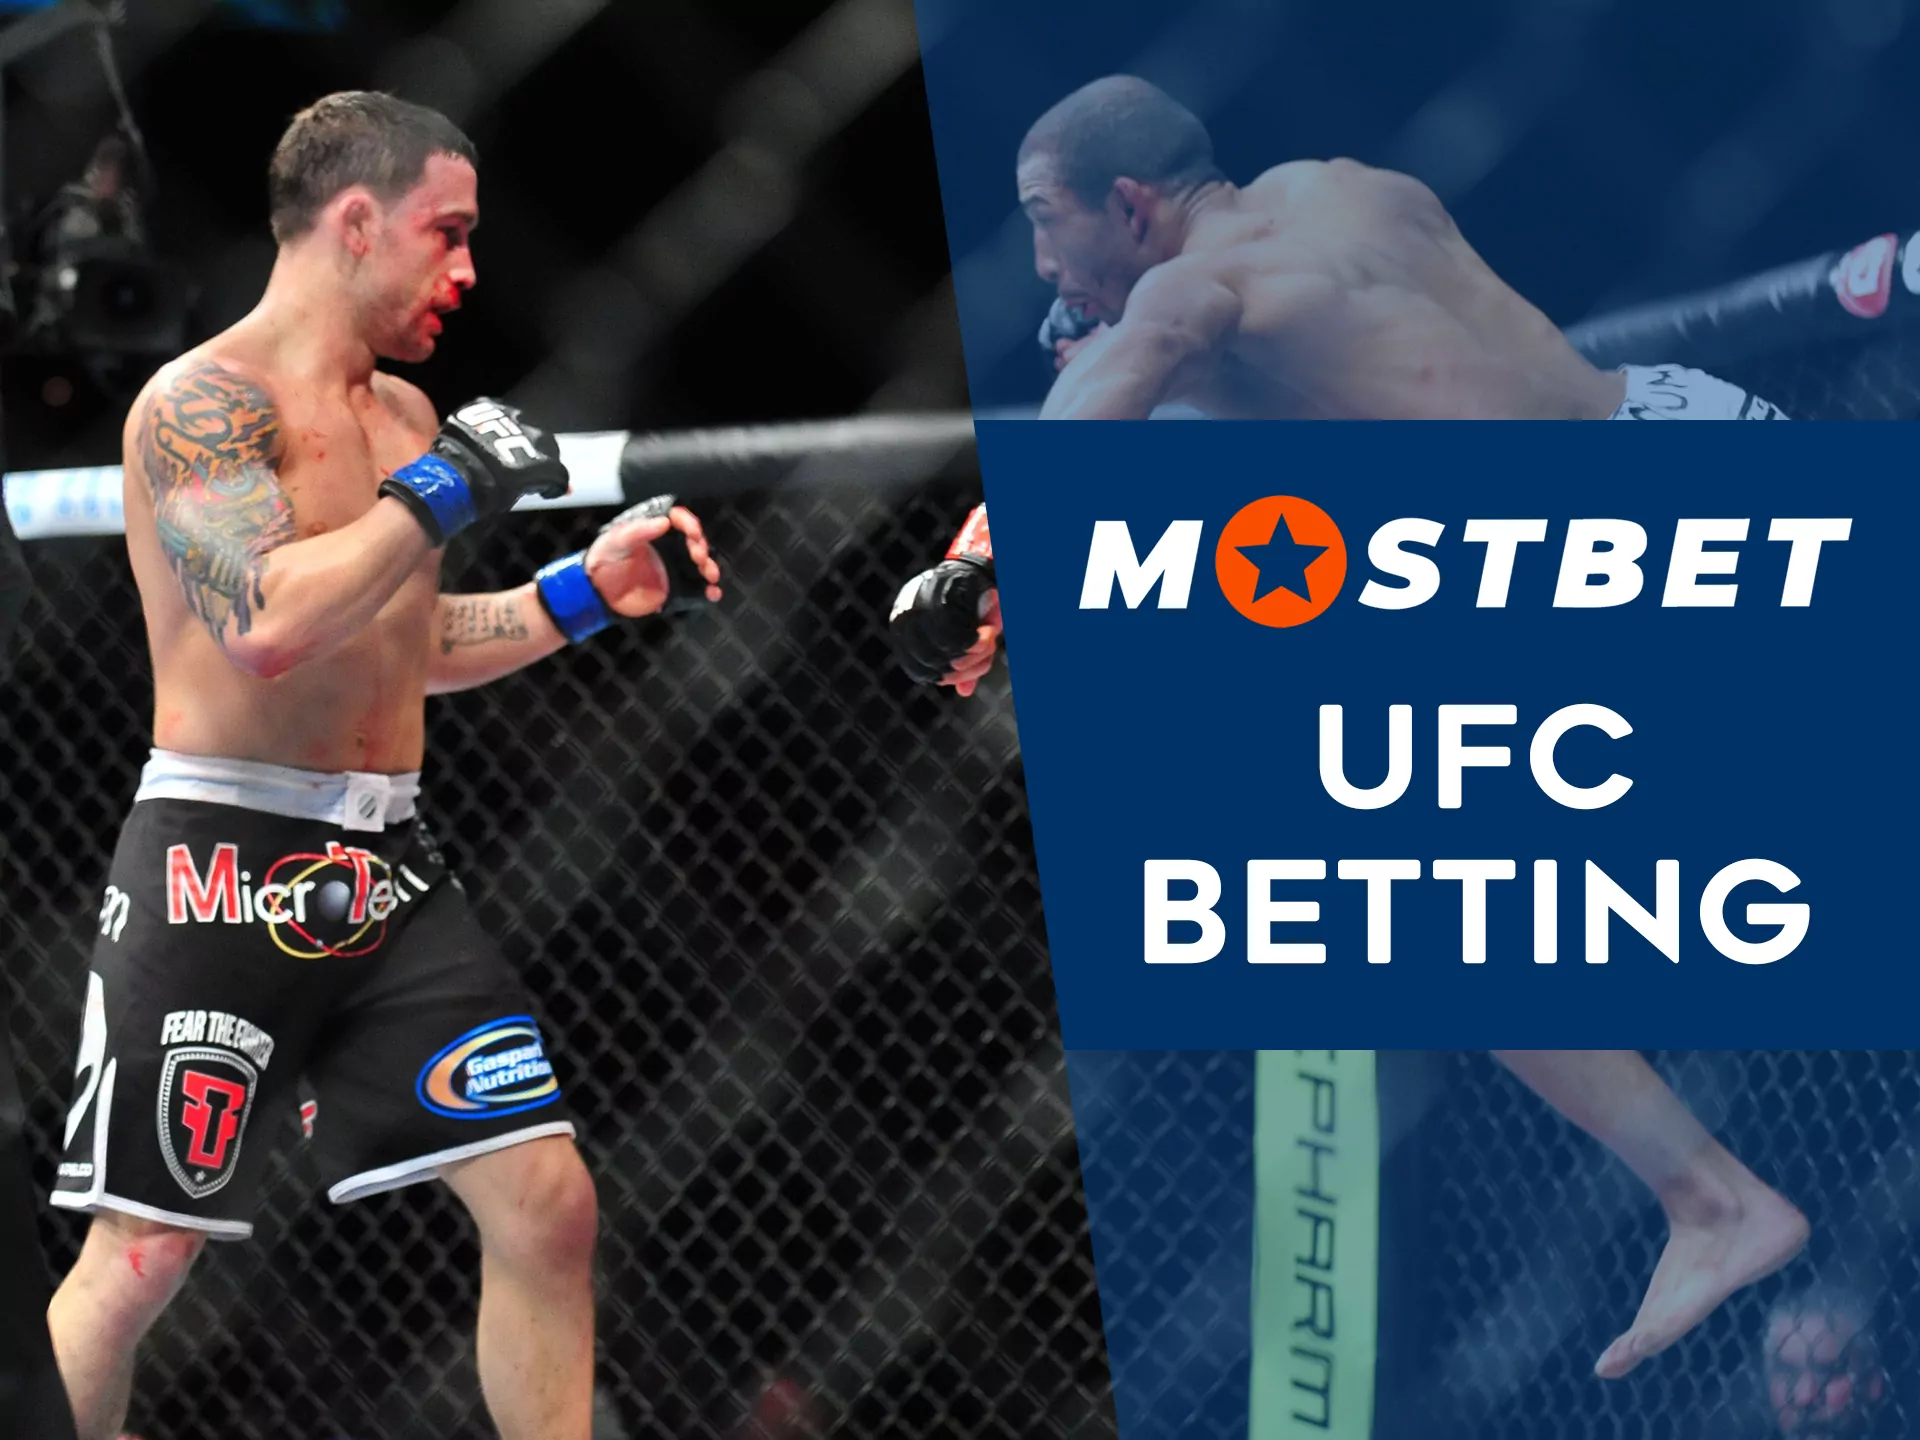 Ufc betting is available at Mostbet online betting site.